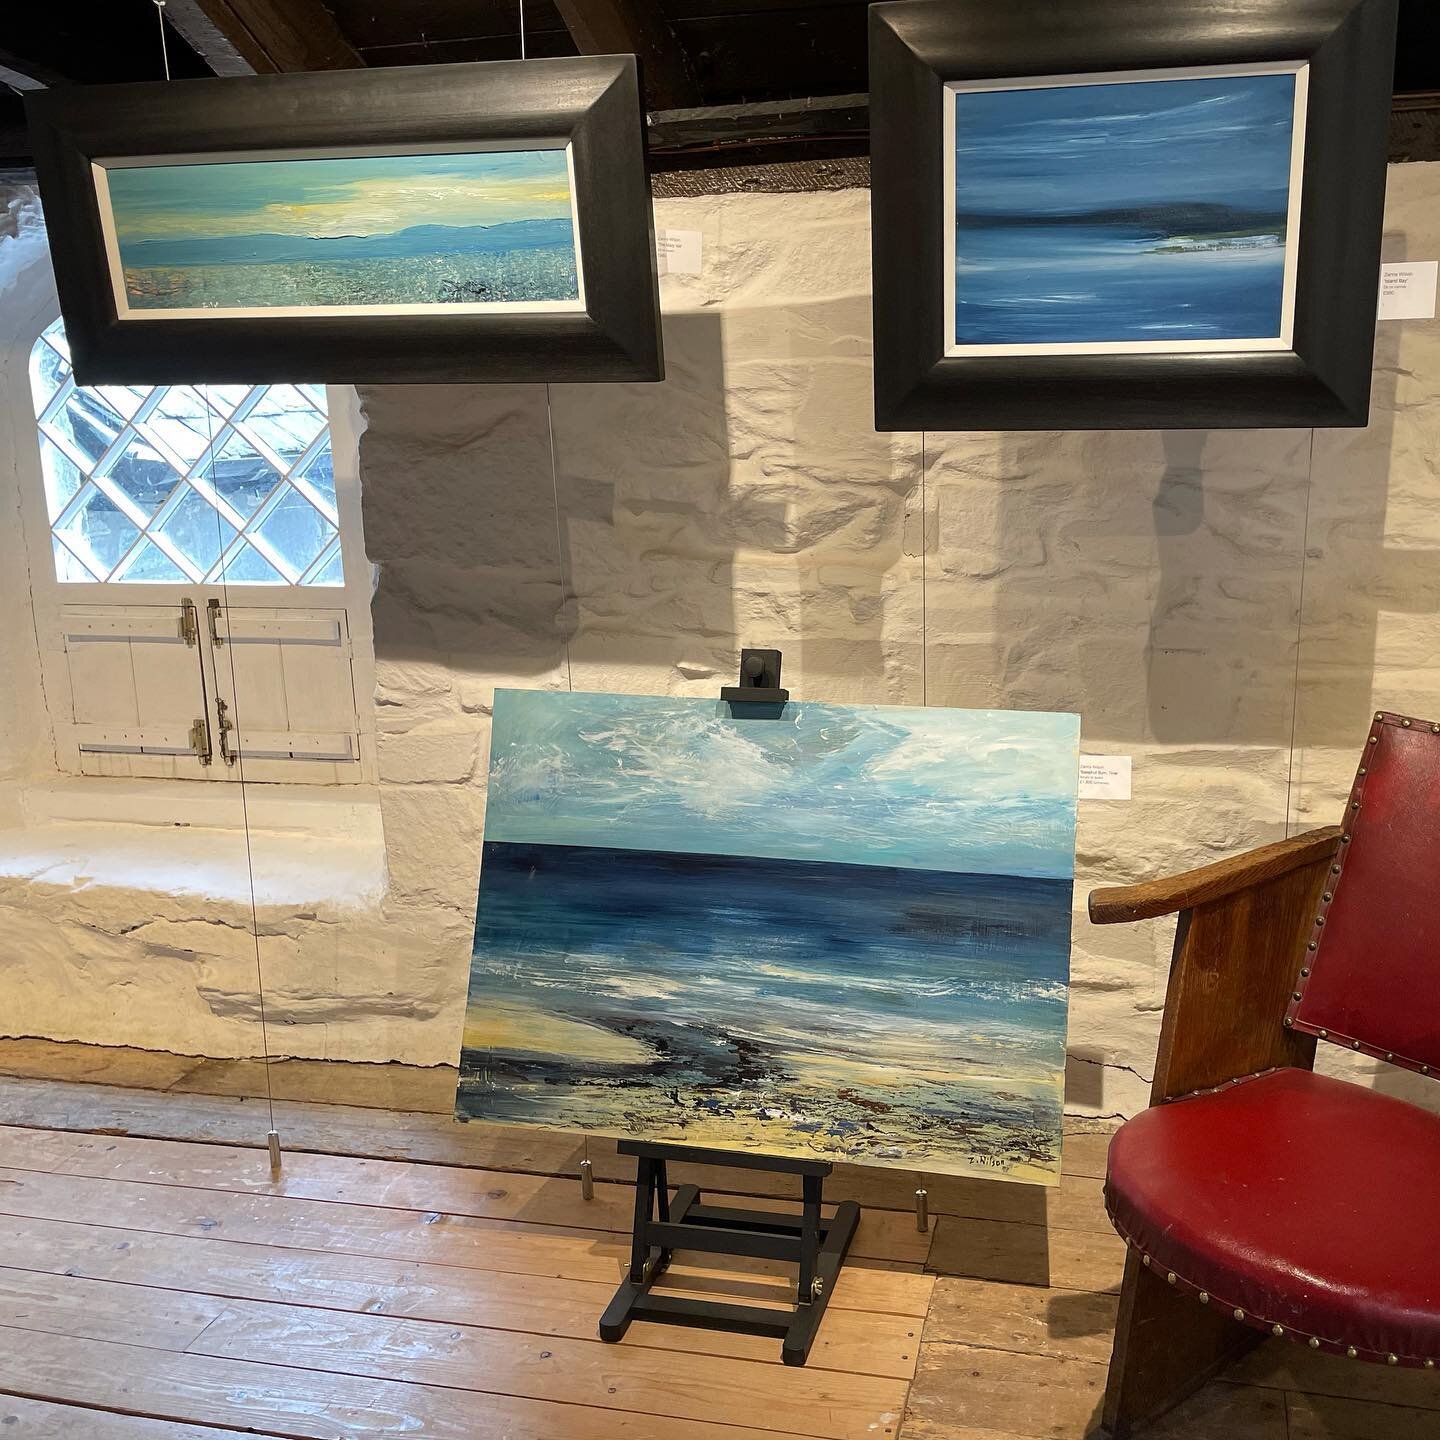 Satisfying trio in the Watermill Gallery. Am here all day (Aberfeldy) if anyone wants to meet the artist?

Showing left to right&hellip;

&lsquo;The Misty Isle&rsquo;, oil on board, 4&rdquo;x14&rdquo;
&lsquo;Island Bay&rsquo;, oil on canvas, 16&rdquo